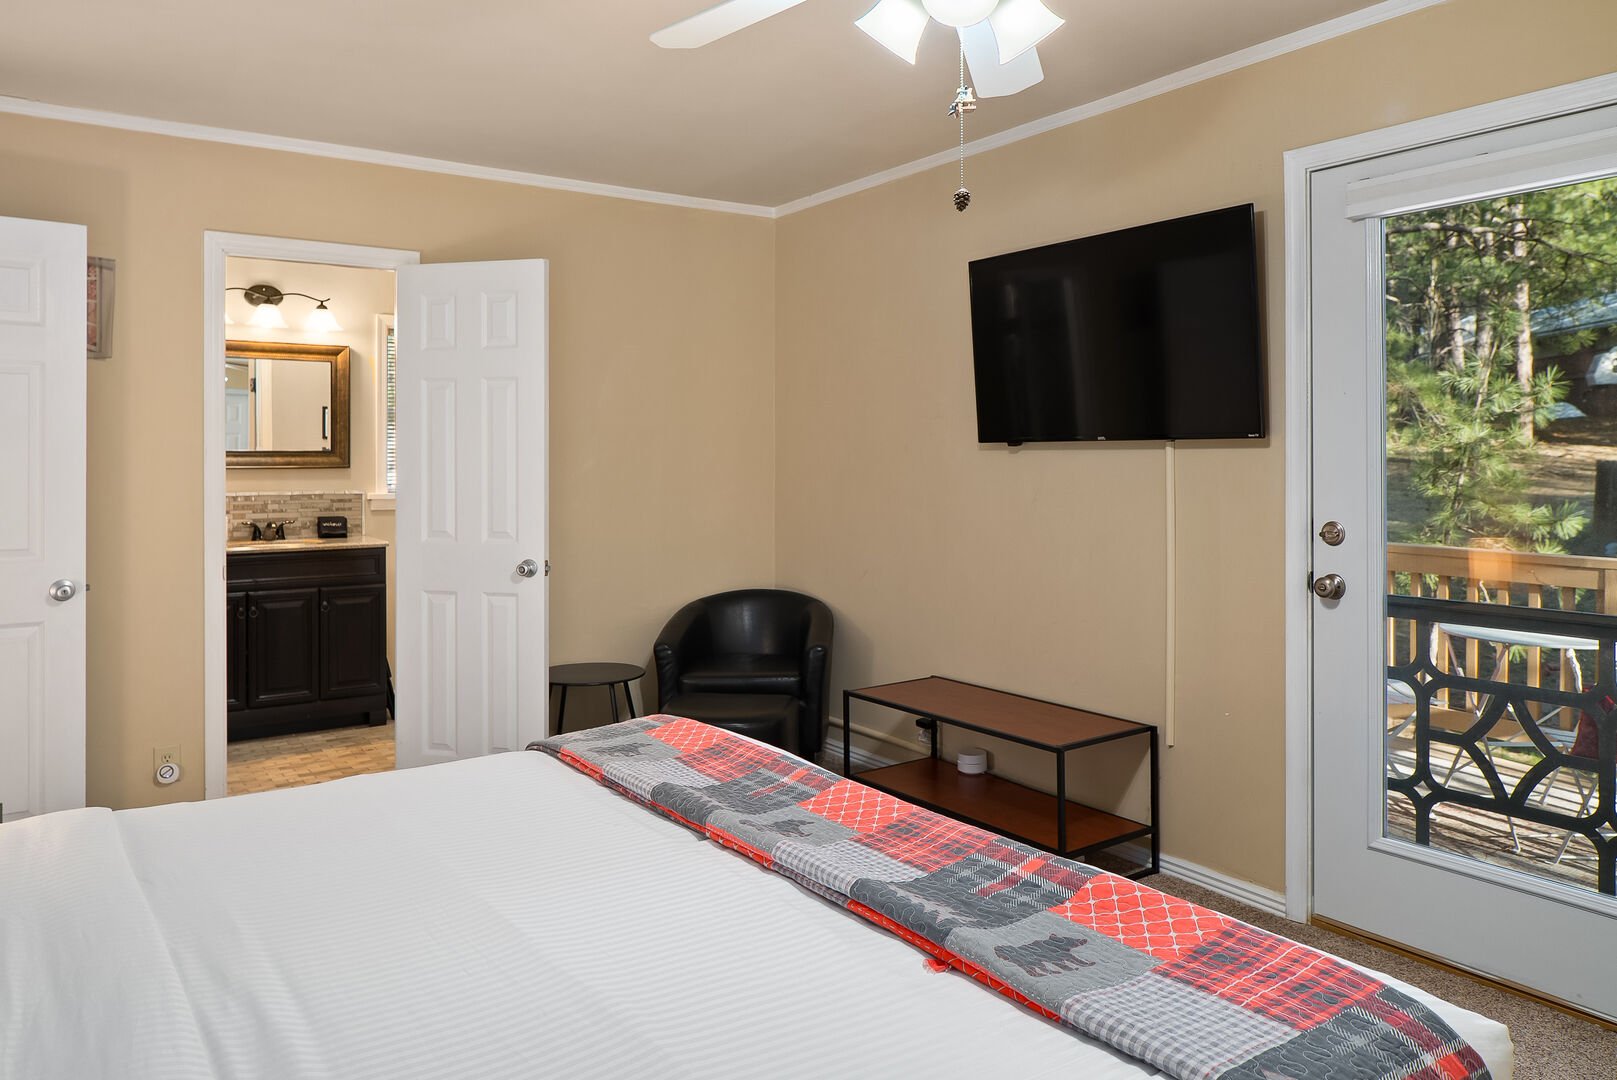 Bedroom 1 offers a flat screen TV, seating in the corner and an ensuite bathroom.